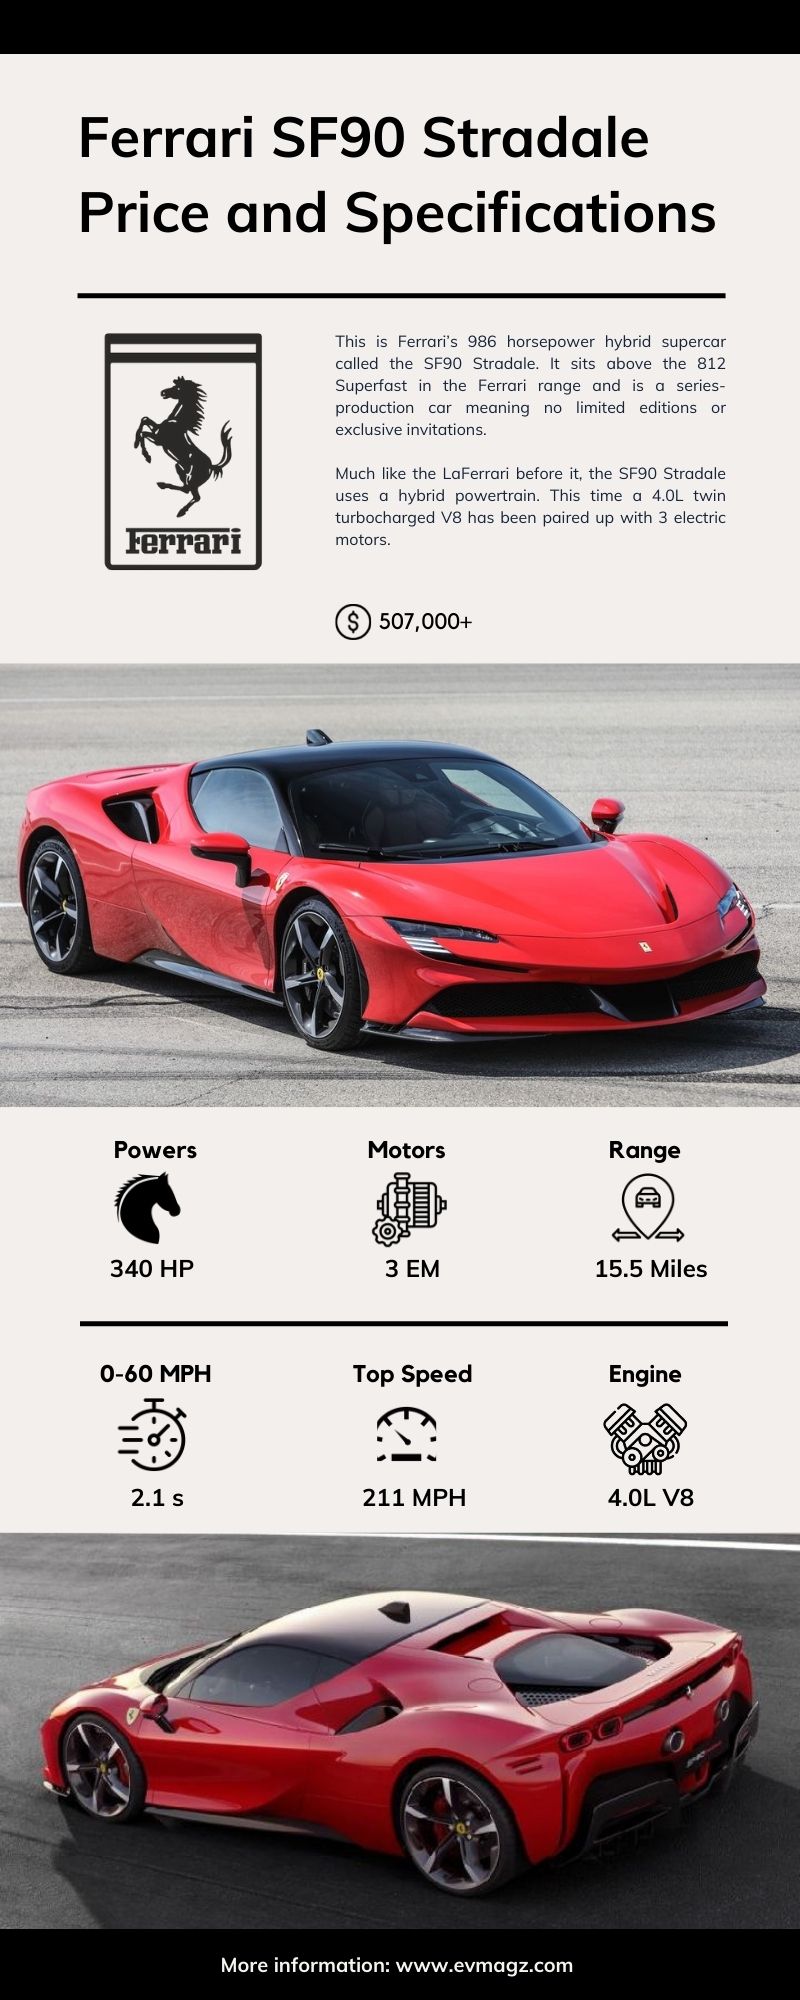 Ferrari SF90 Stradale Price and Specifications